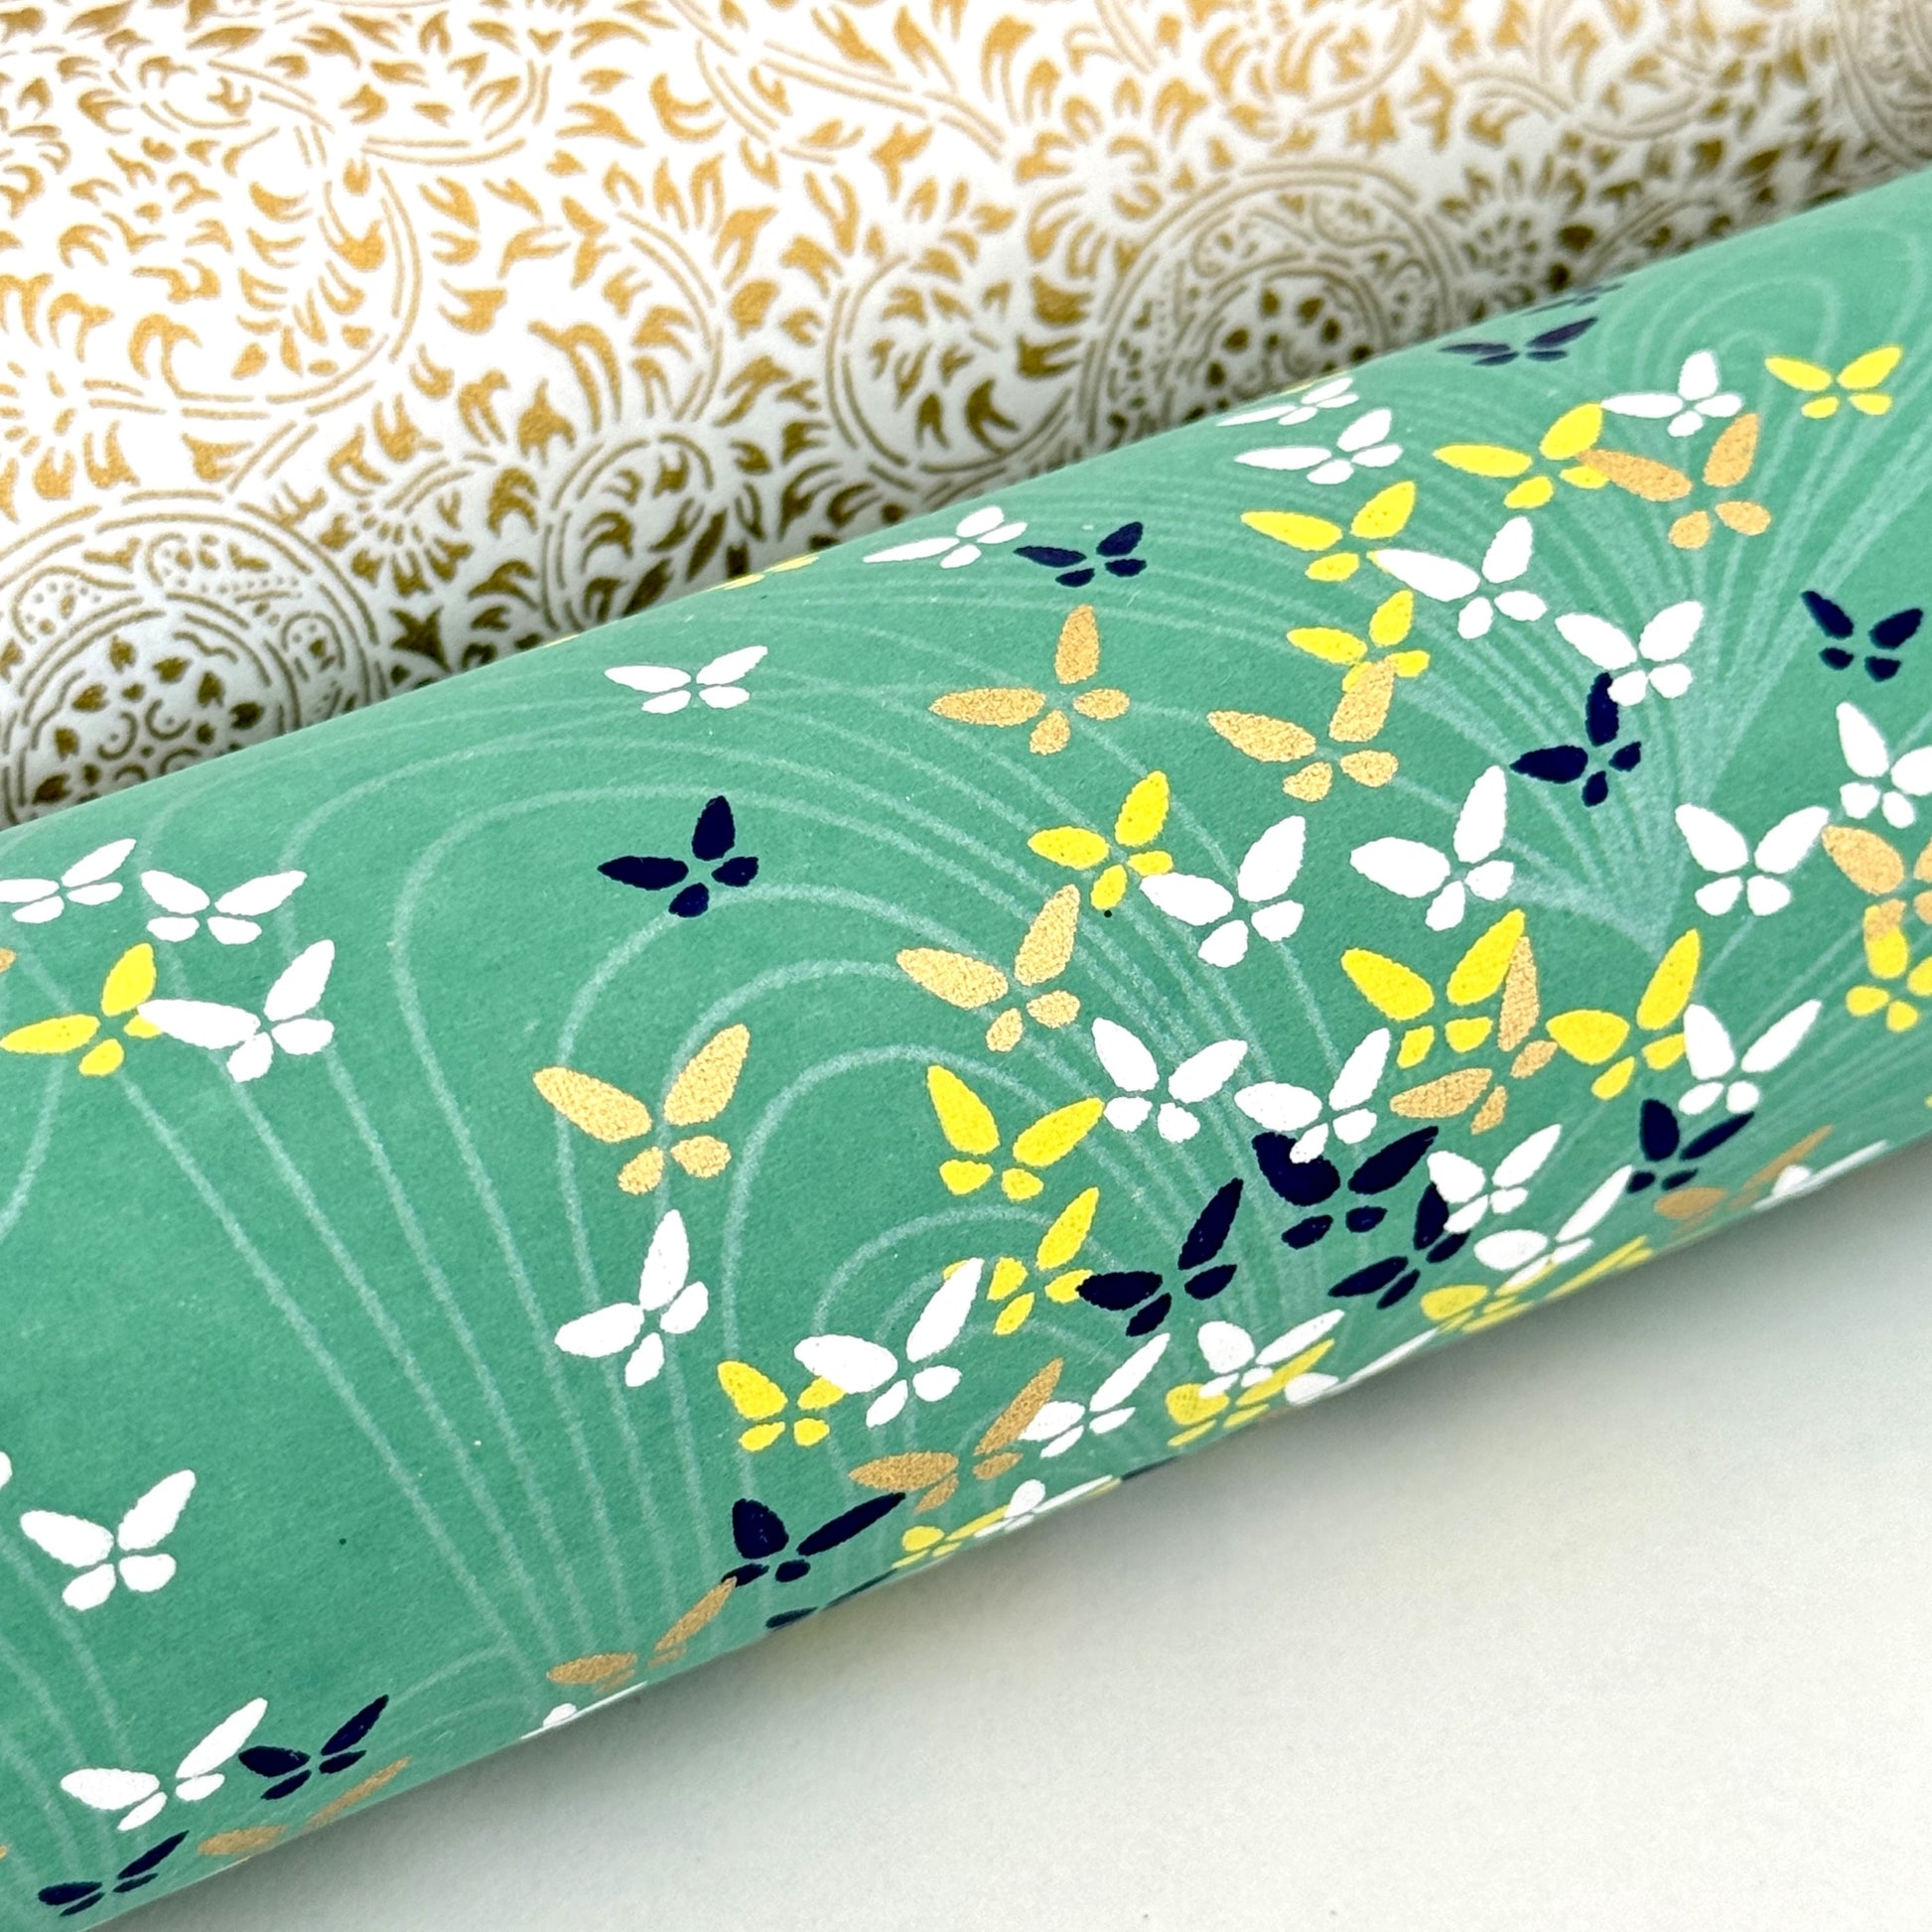 Japanese silkscreen chiyogami paper with a delicate butterfly pattern on a teal backdrop. Close up